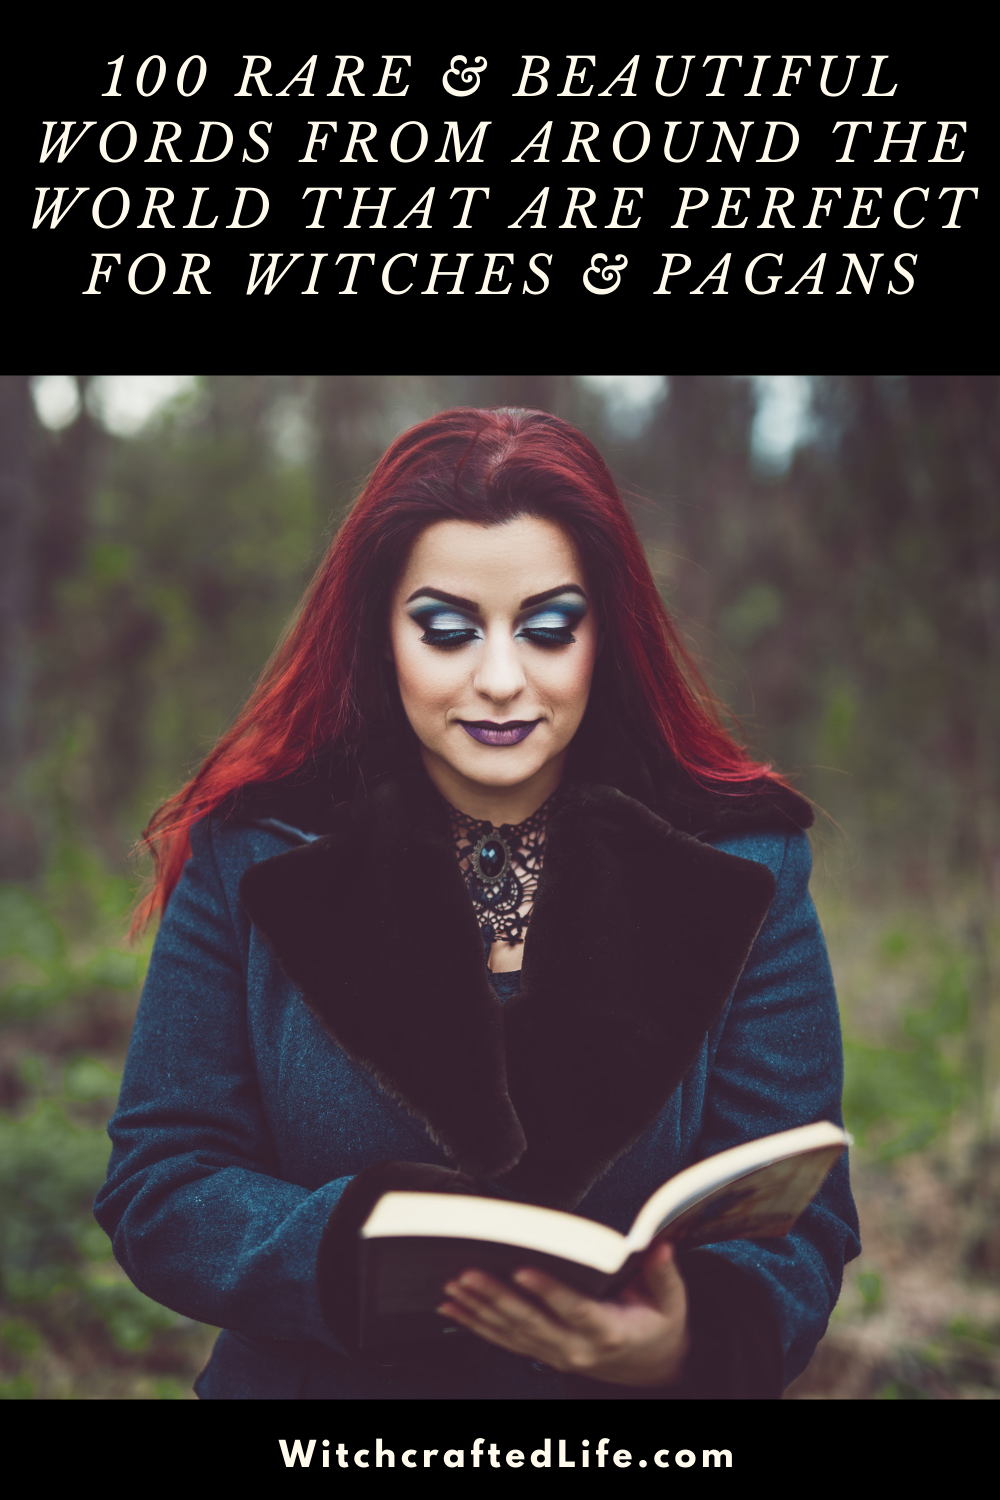 100 Rare and Beautiful Words From Around The World That are Perfect for Witches and Pagans